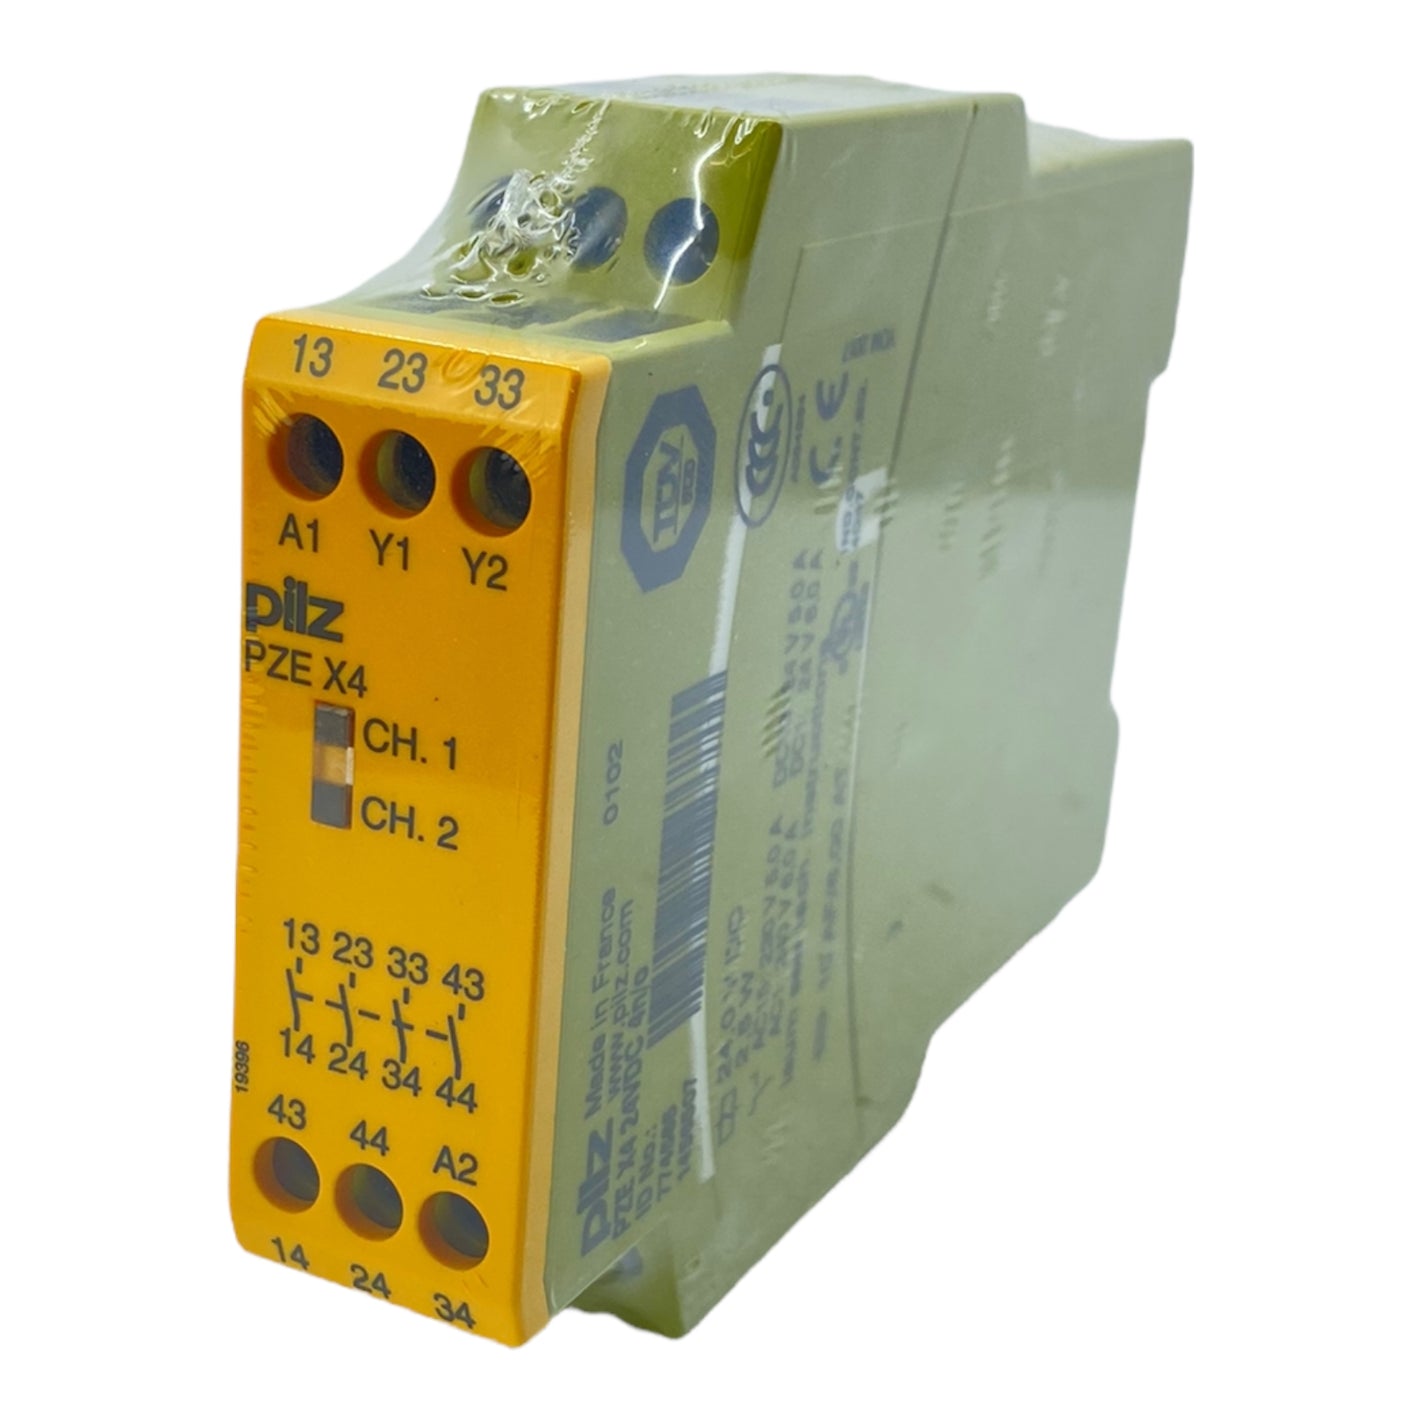 Pilz PZE X4 24VDC 4/n 774585 safety relay 4 safety contacts 1-channel 24V 